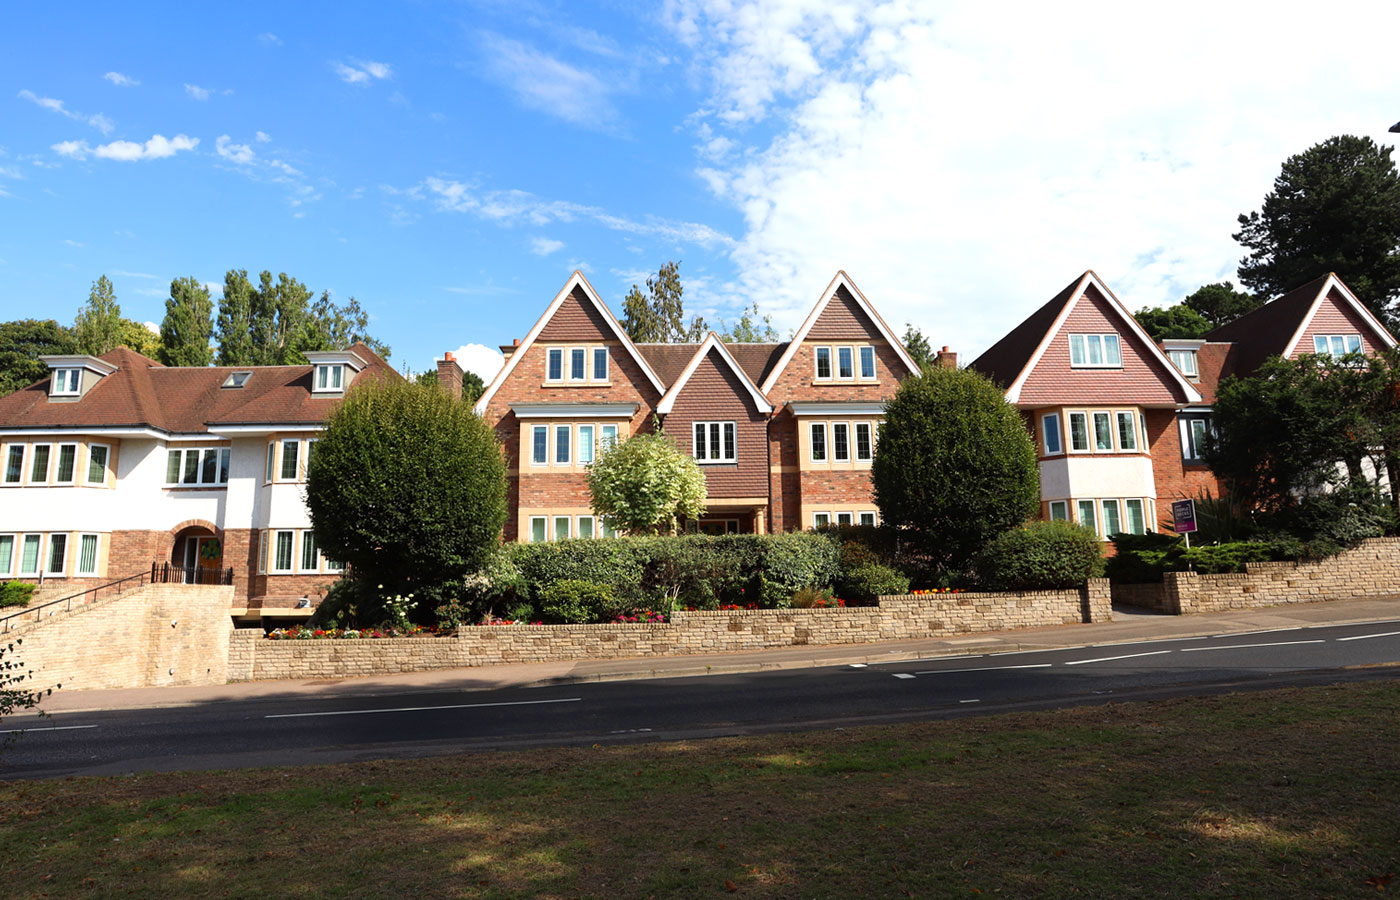 architect designed apartments Sutton Coldfield,Wyndley Gate apartments designed for Client St Cuthbert Homes